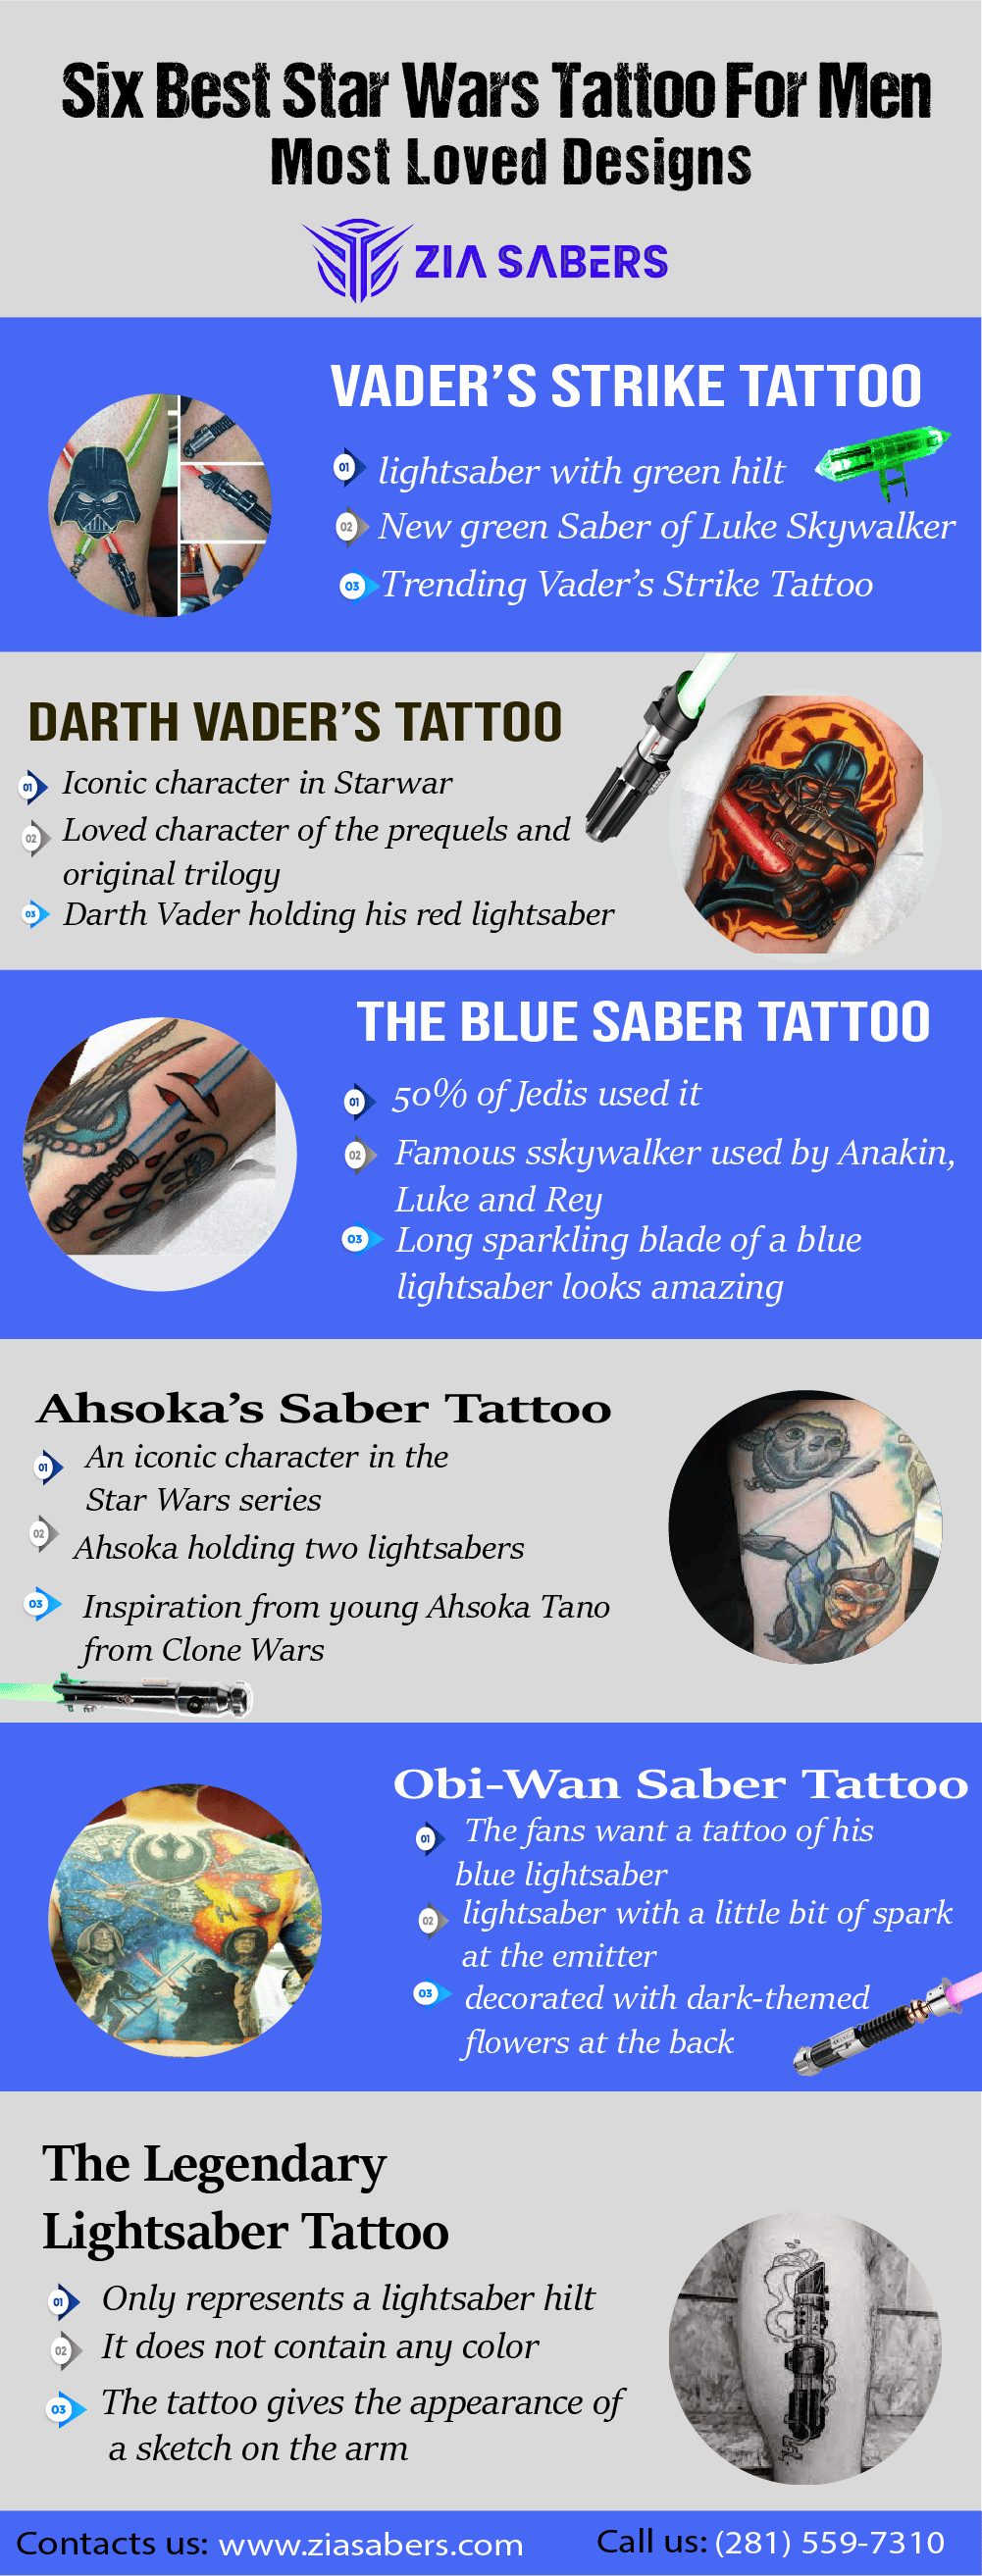 Six Best Star Wars Tattoo For Men - Most Loved Designs - ZIA Sabers™